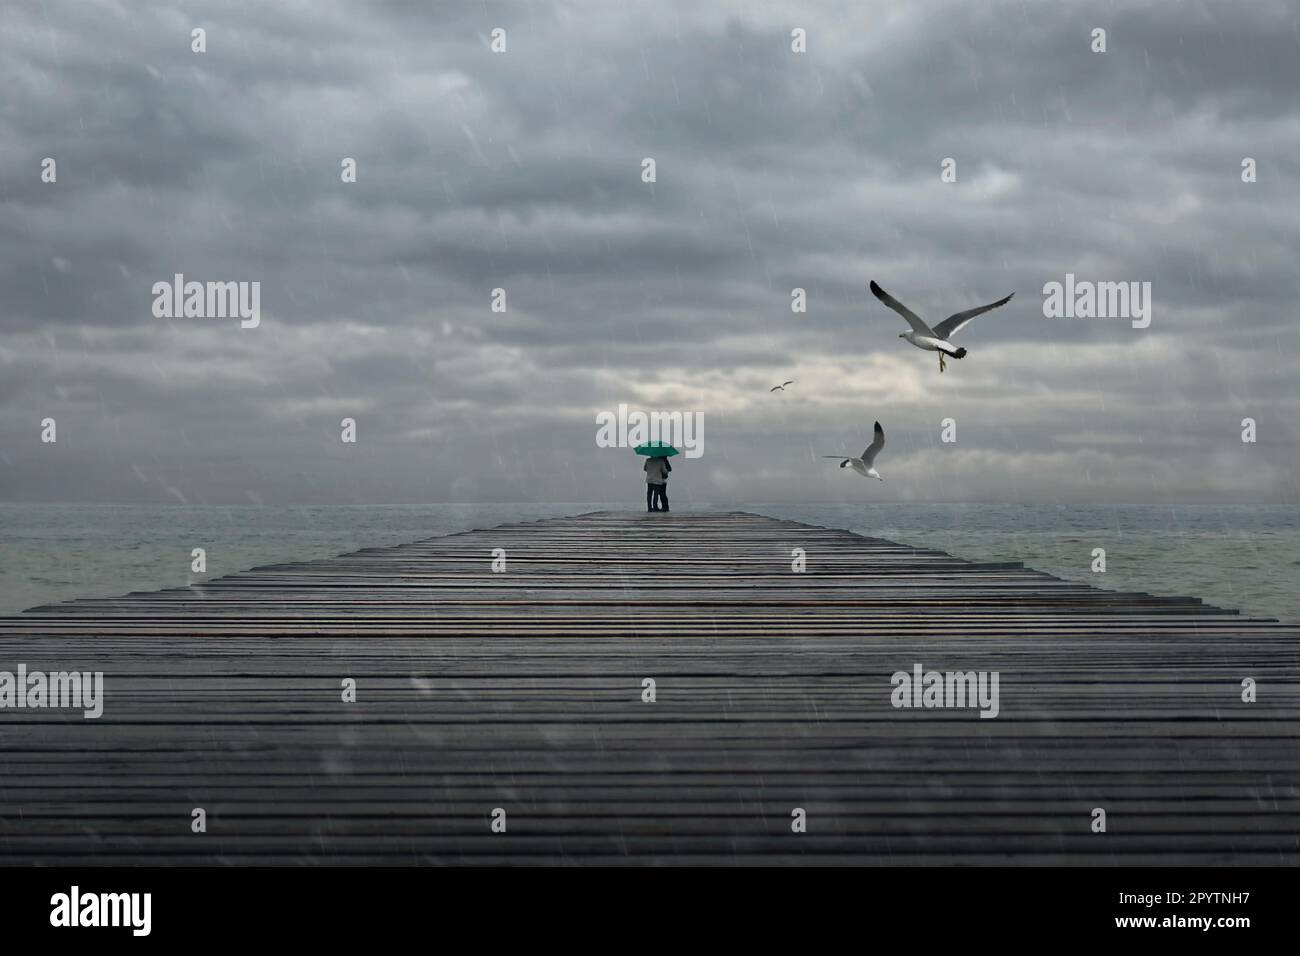 rainy day on the lakeshore,a man and a woman are standing on a wooden bridge under a green umbrella,people's faces are not visible,seagulls are flying Stock Photo